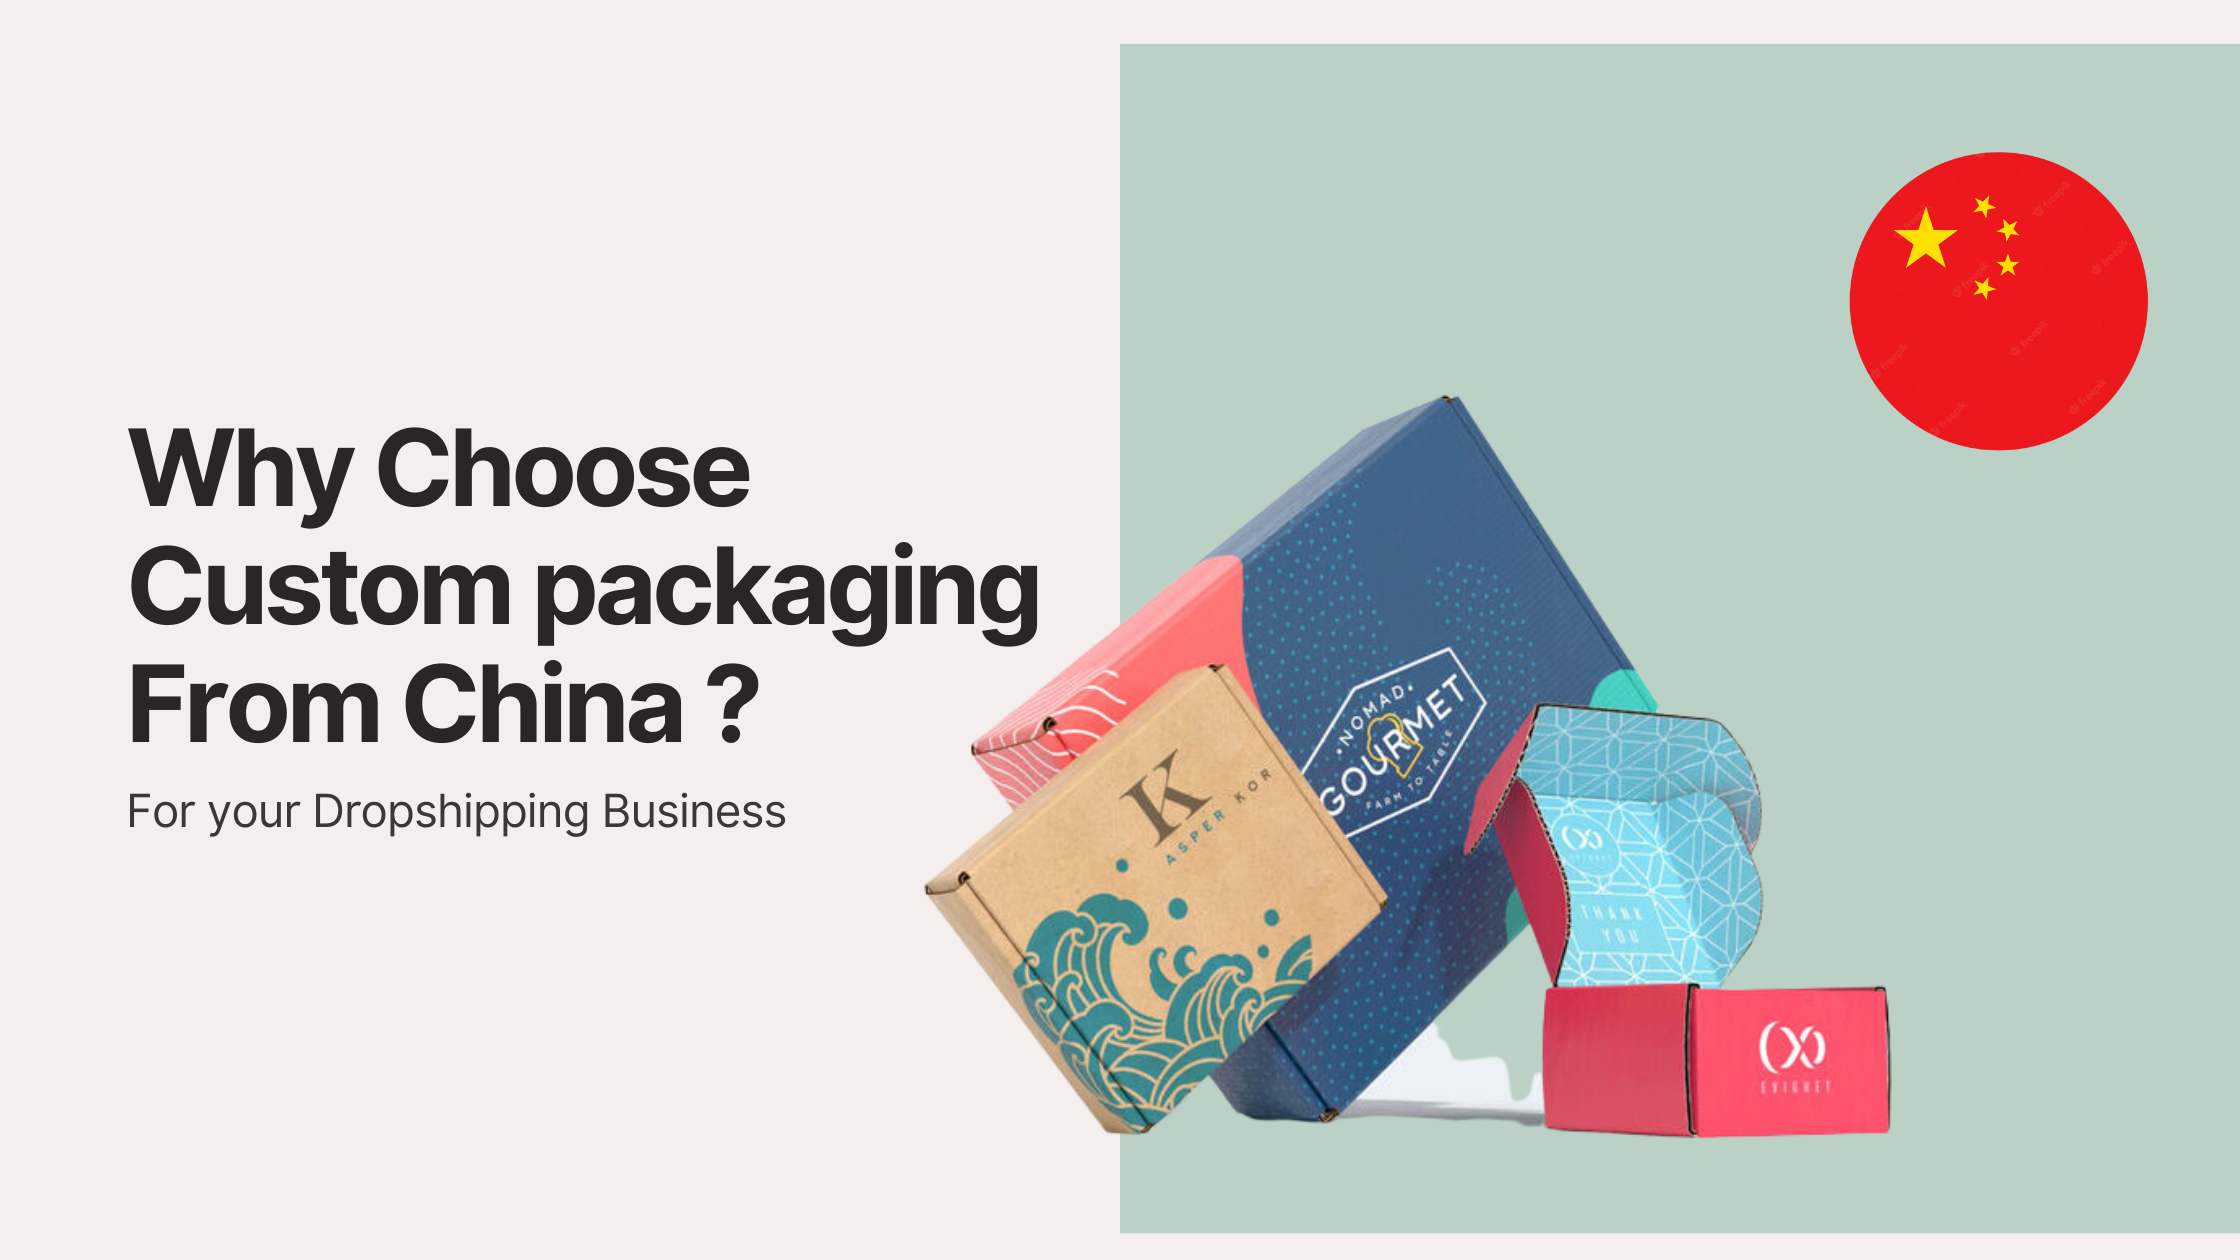 Why choose custom packaging from china for drop-shipping business